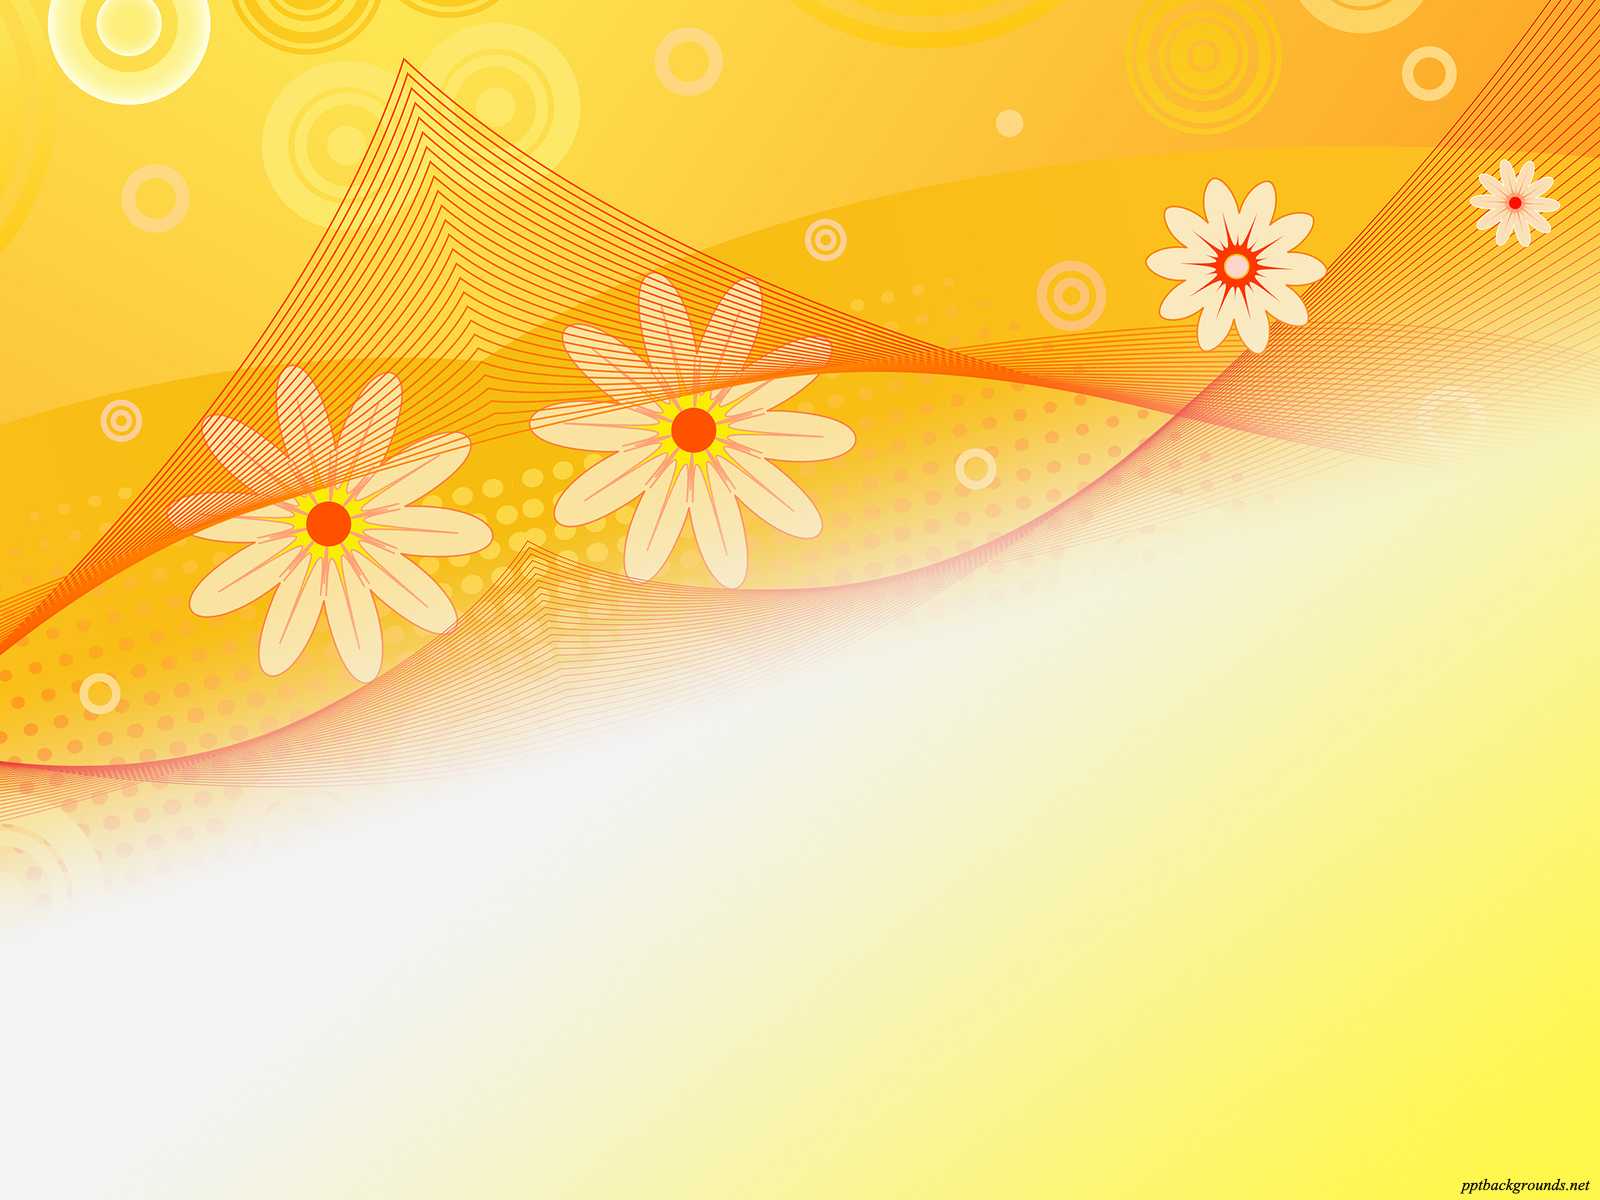 Sunflower Abstract Beauty Backgrounds For Powerpoint In Pretty Powerpoint Templates